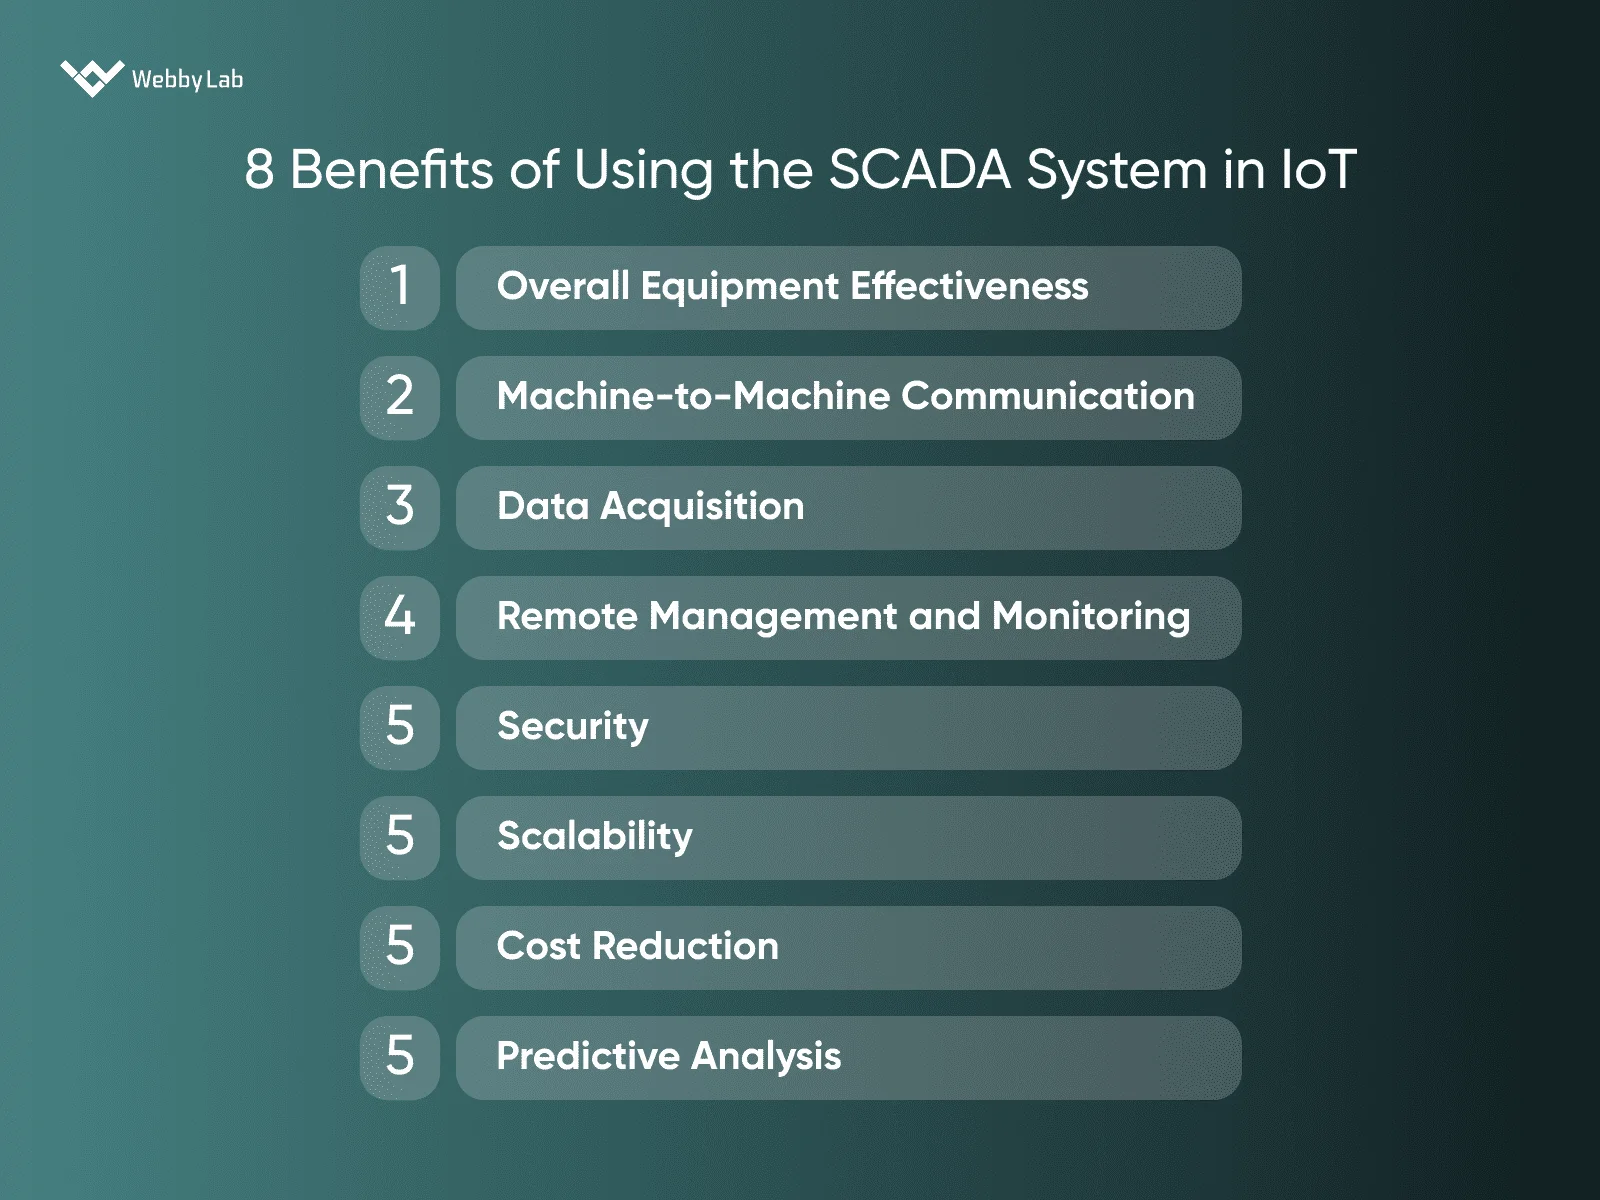 8 Benefits of Using the SCADA System in IoT